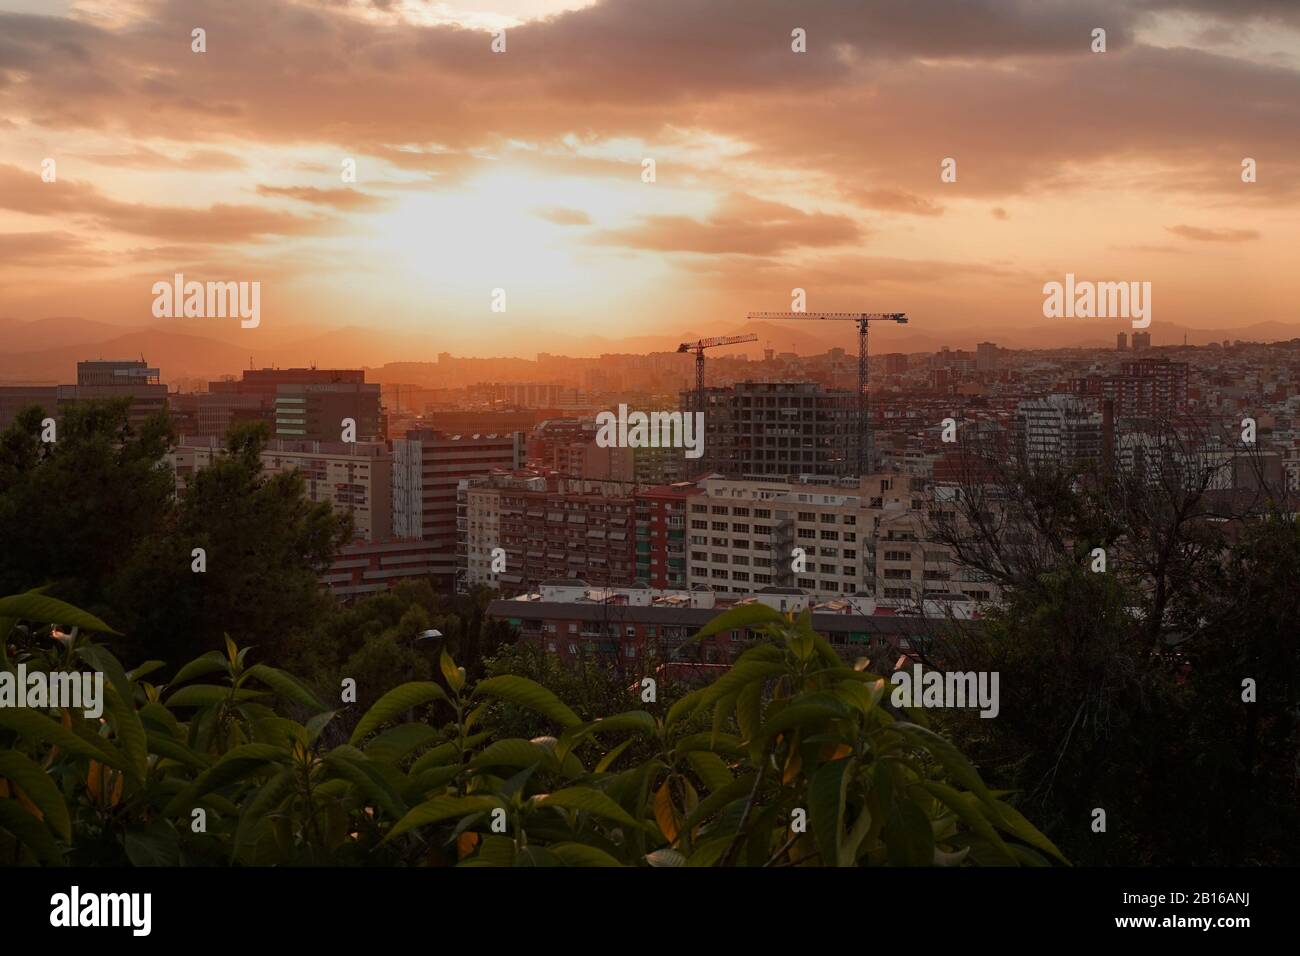 Sunset over Barcelona city outskirts with cranes and high rises making the skyline with greenery in the foreground Stock Photo